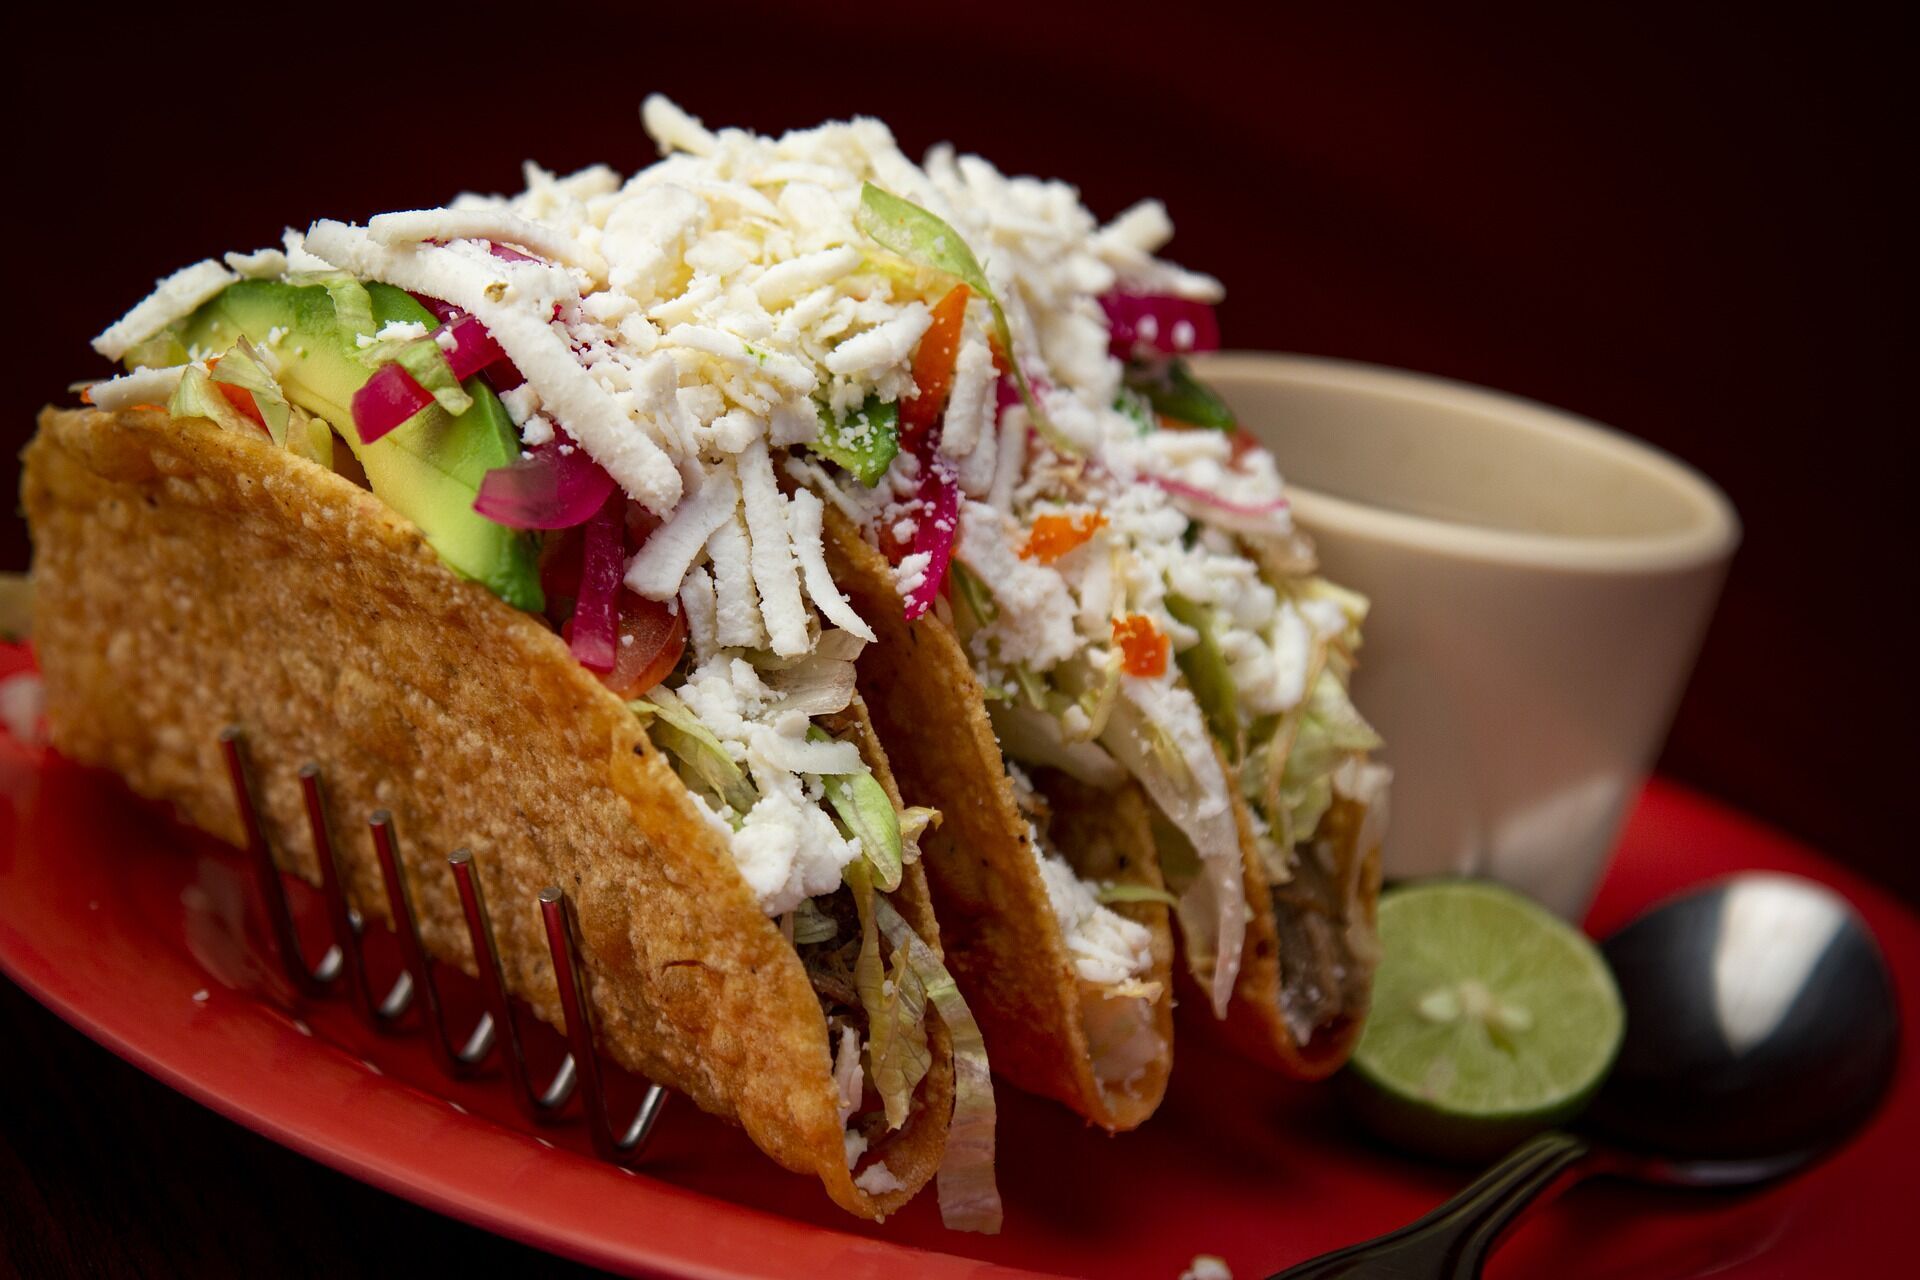 Tacos are a traditional Mexican dish